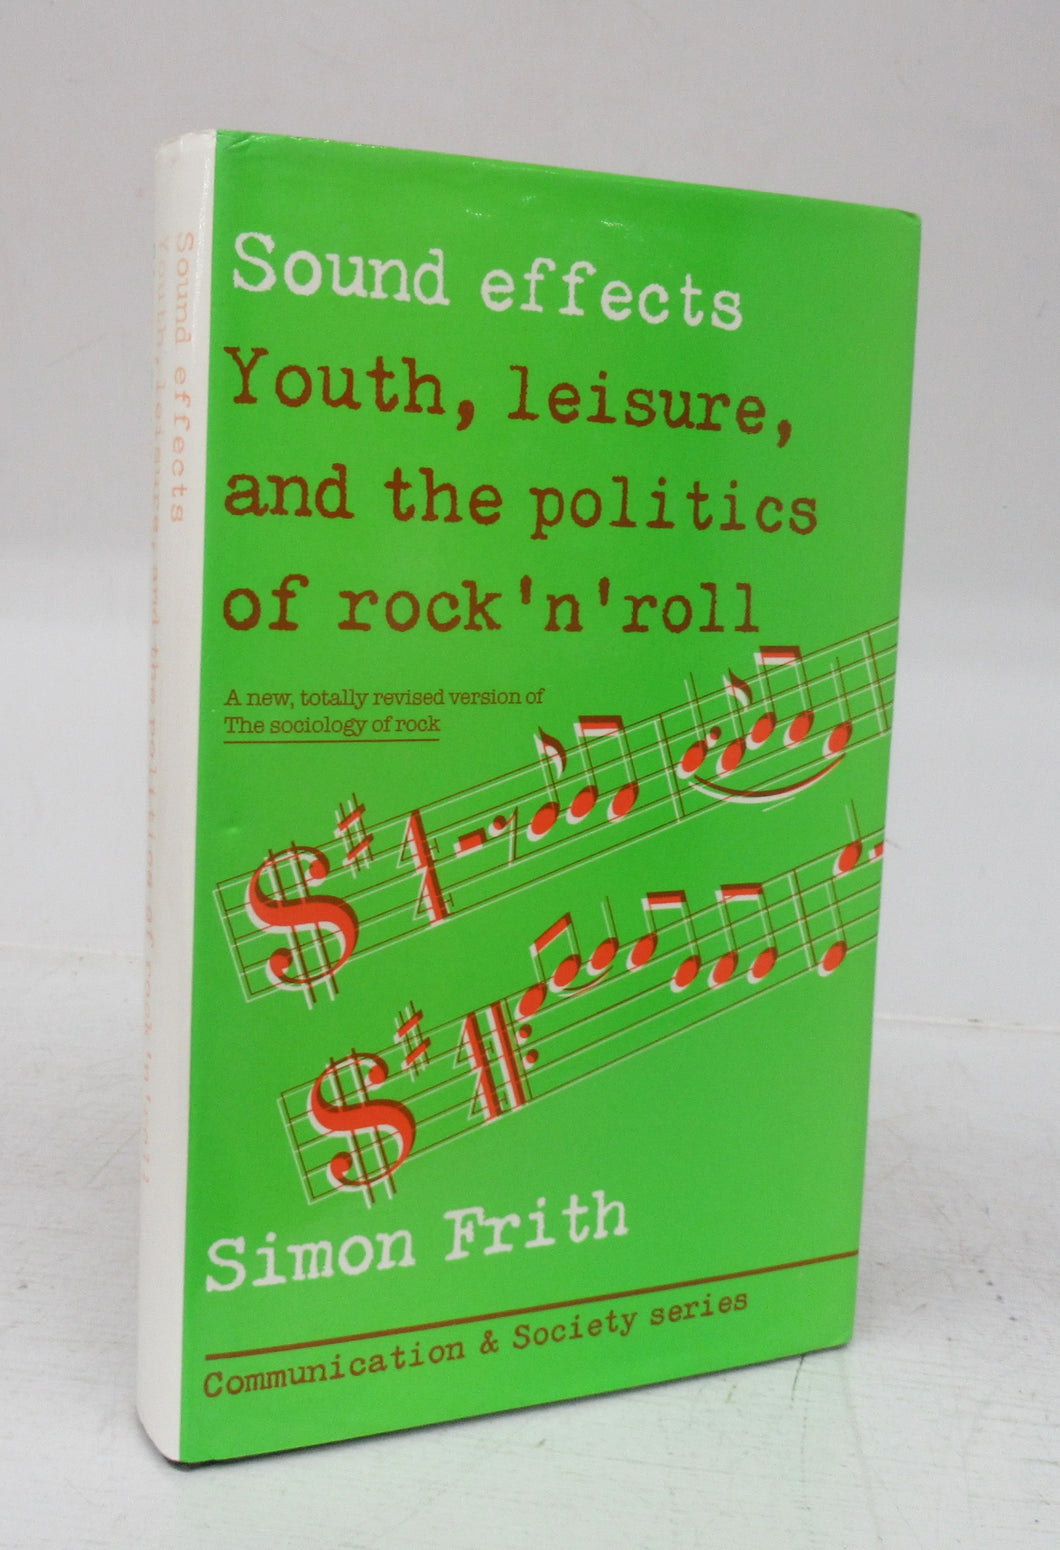 Sound effects: Youth, leisure, and the politics of rock 'n' roll